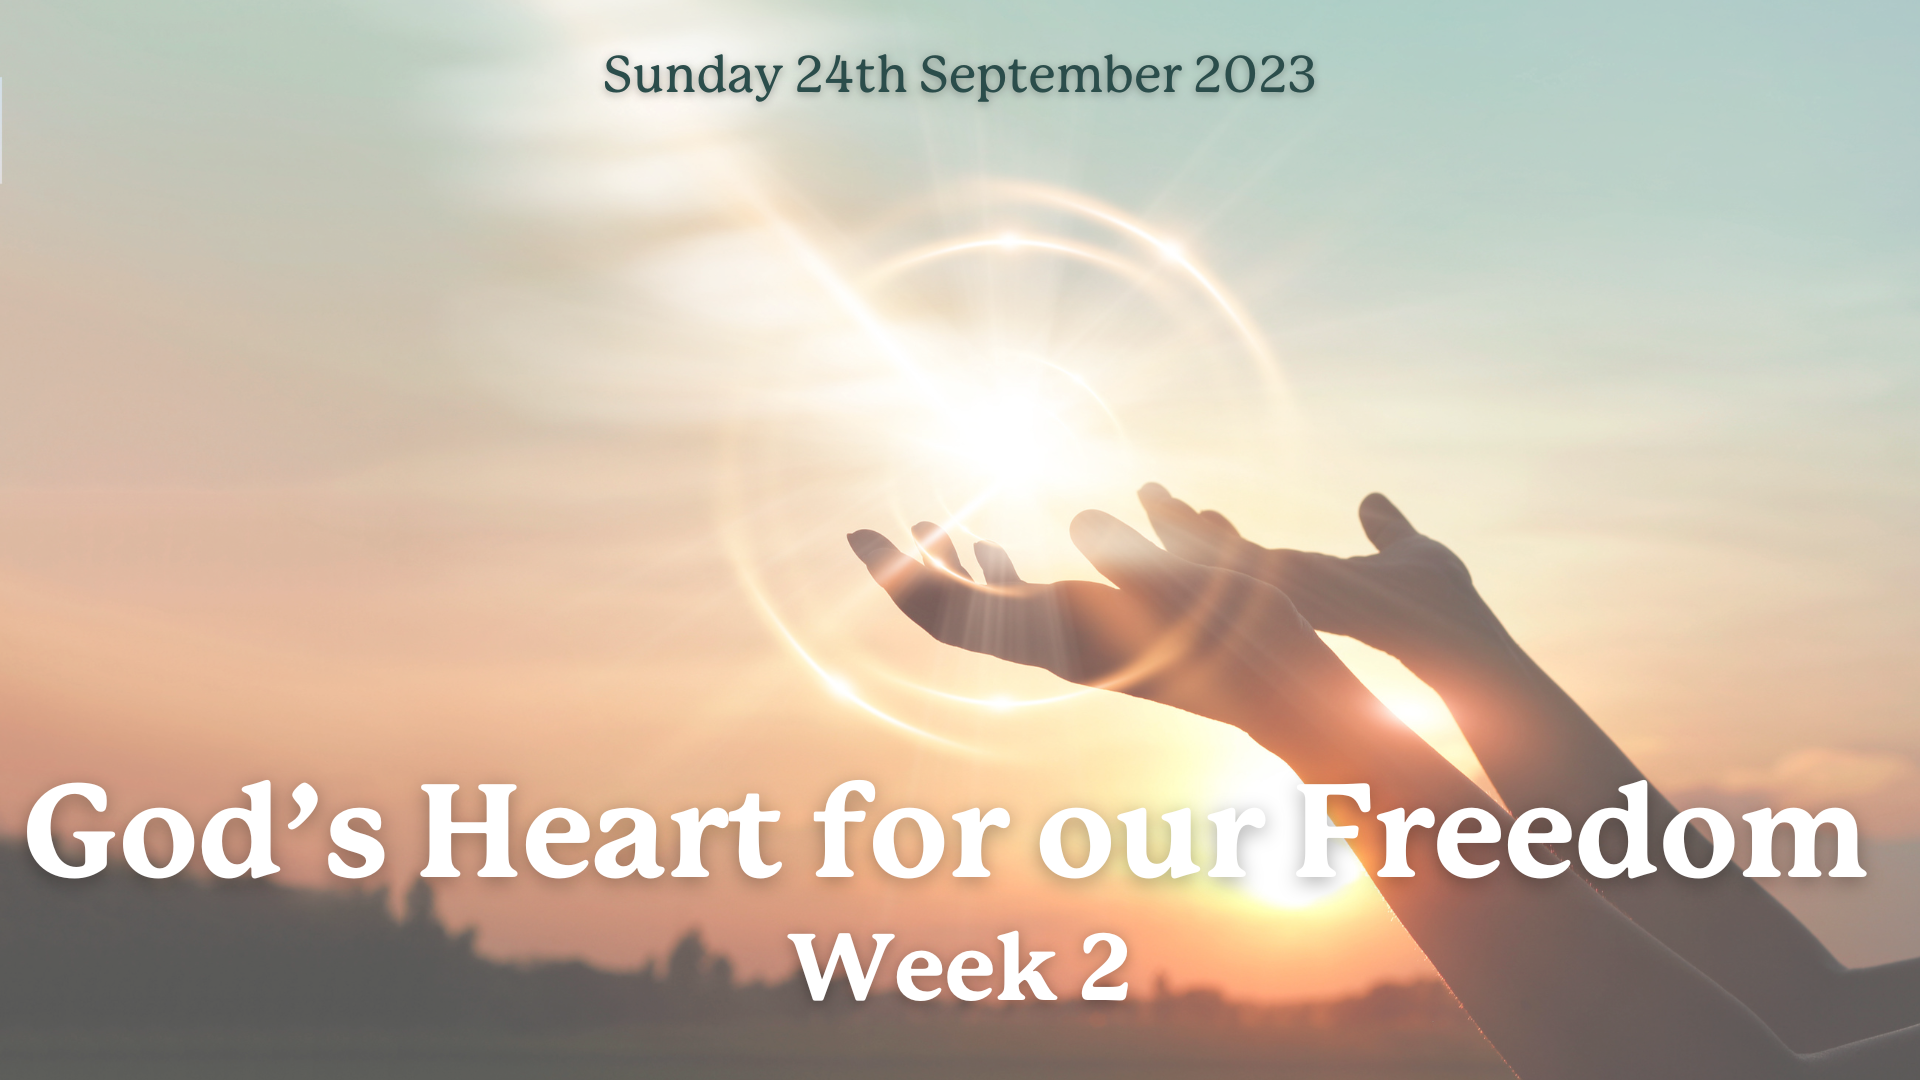 Sunday Service - God's Heart for your Freedom - Week 2